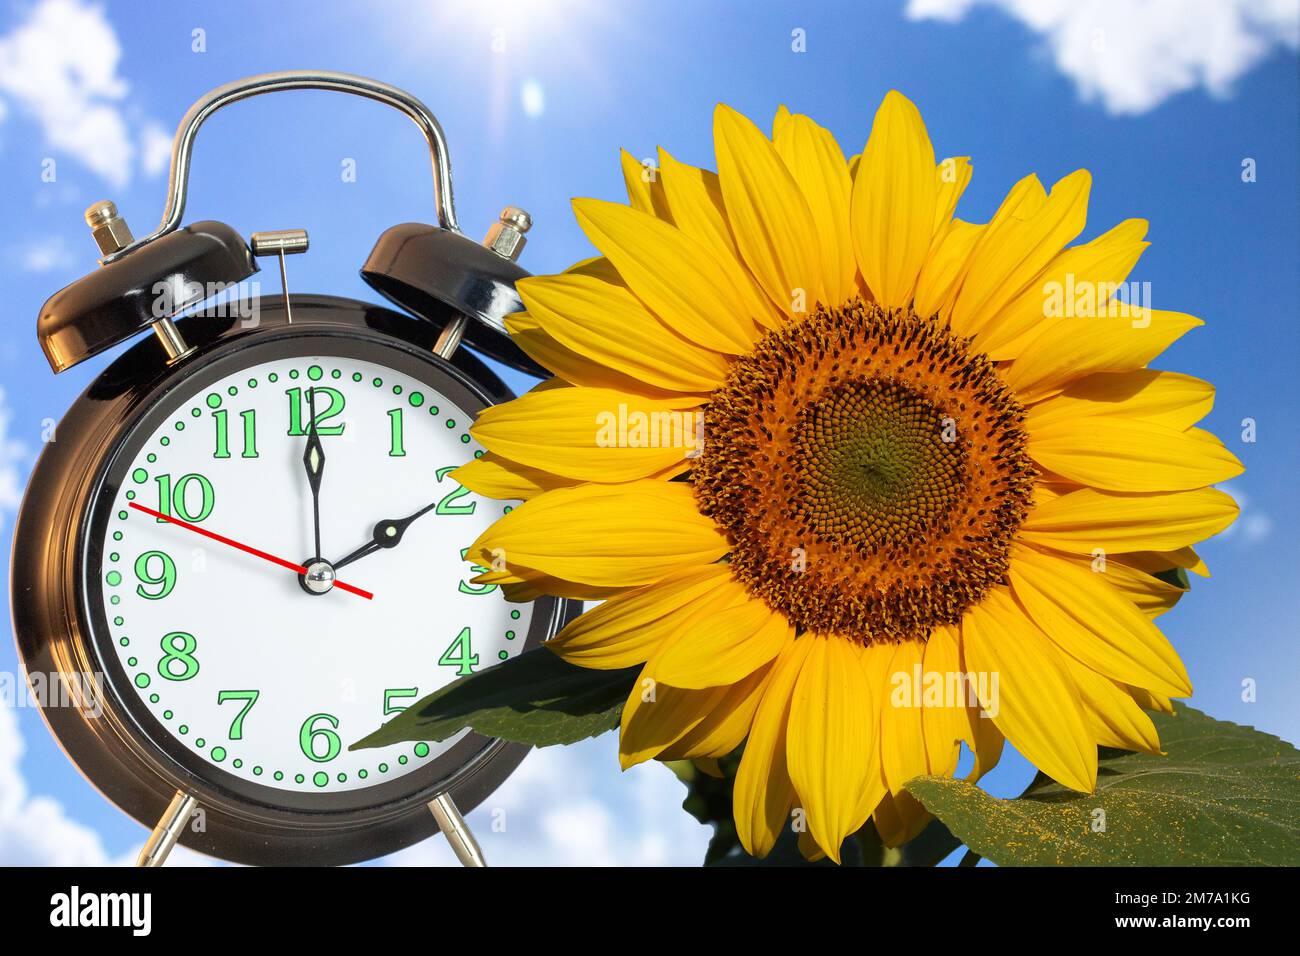 Symbol image of the time changeover to summer time time: Close-up of an alarm clock and a sunflower against a blue sky Stock Photo